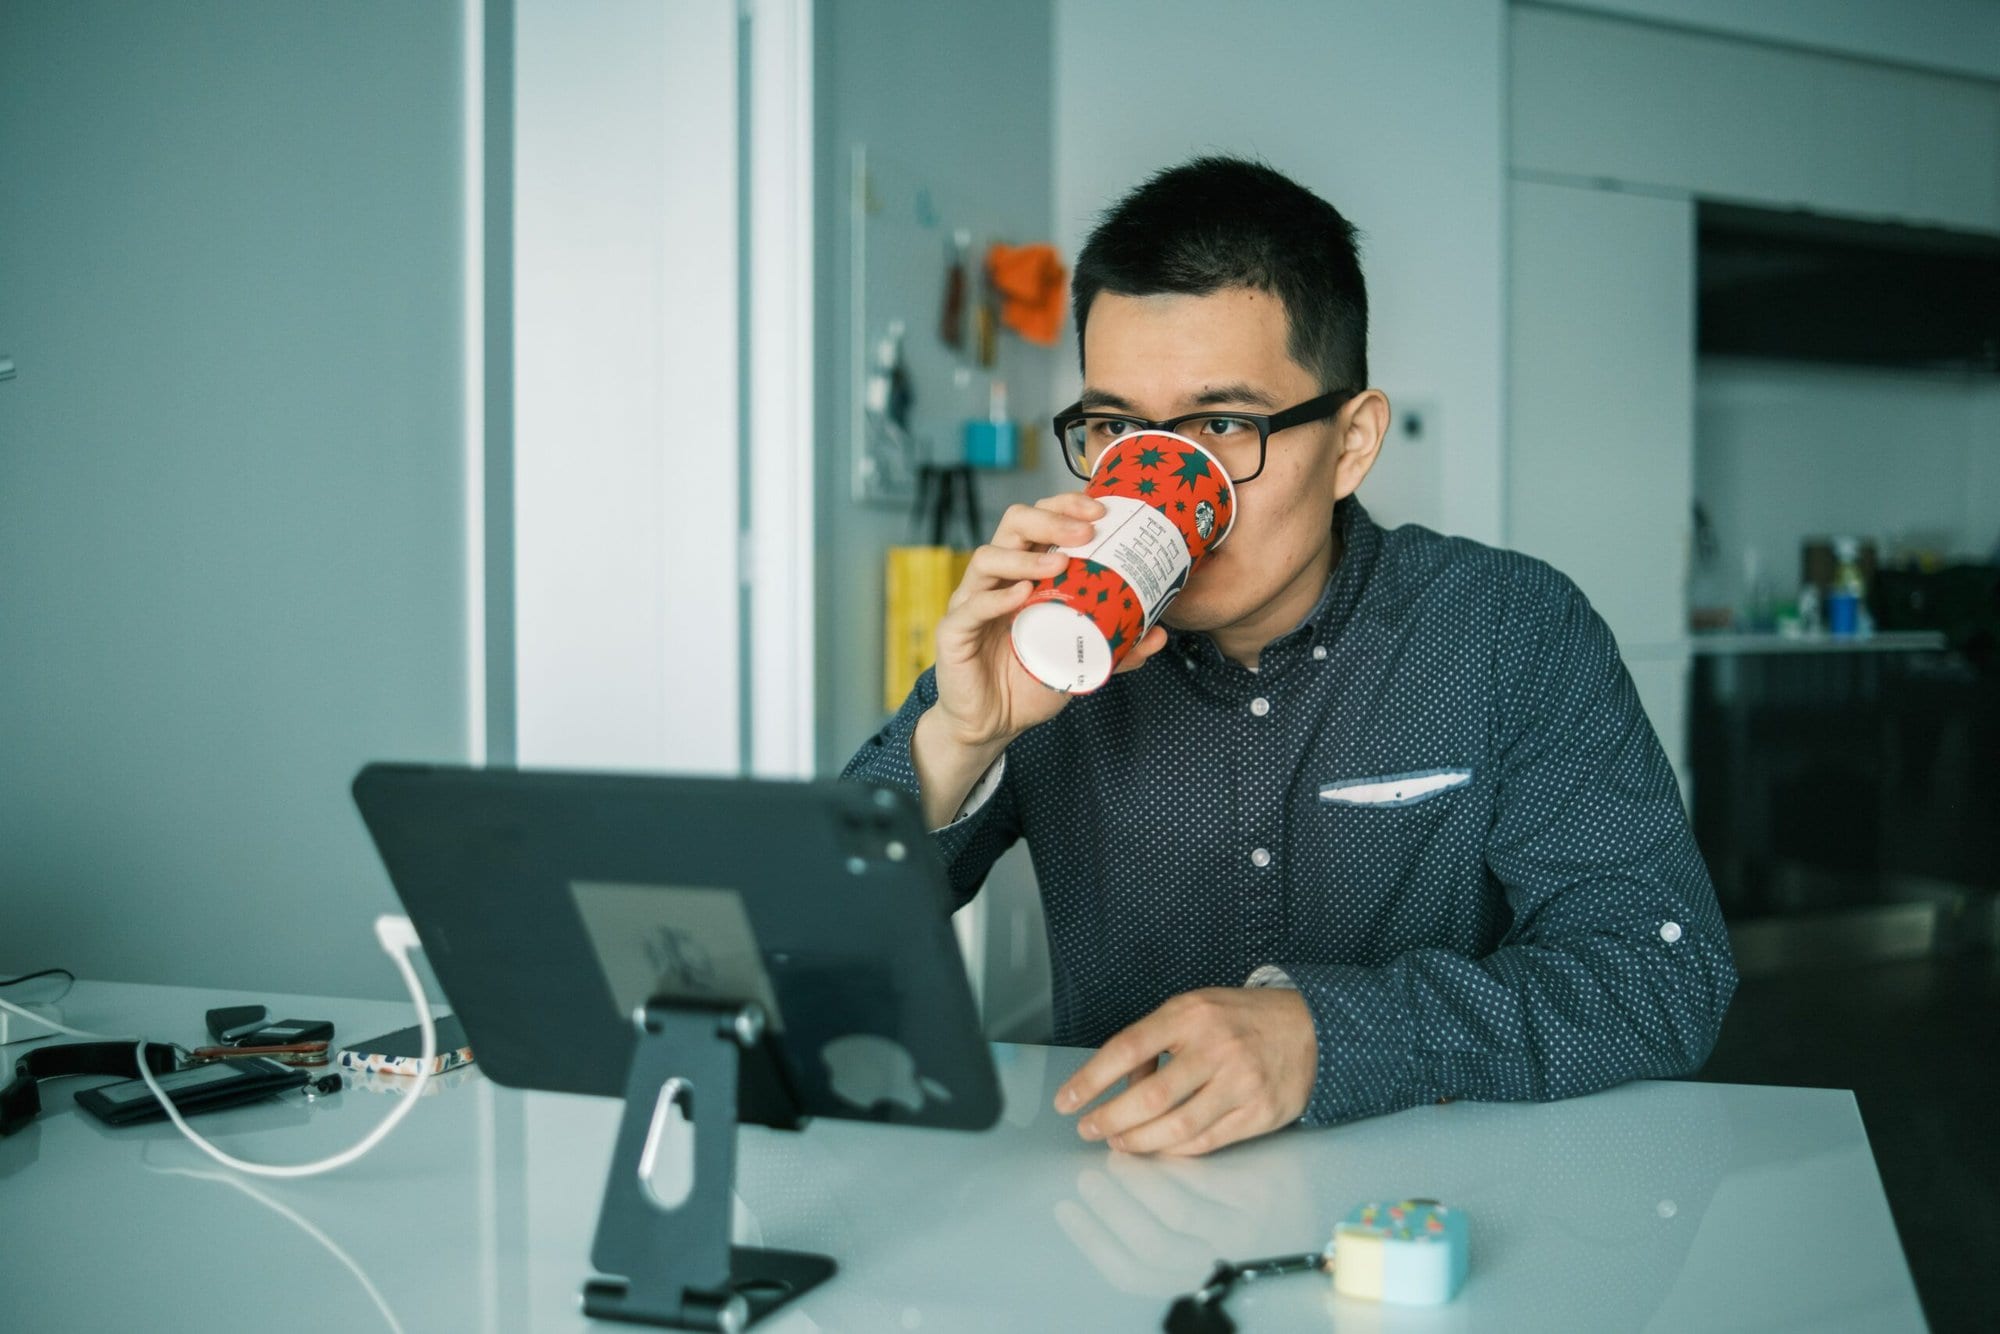 A man sips coffee while engrossed in his computer, researching the NVR meaning.